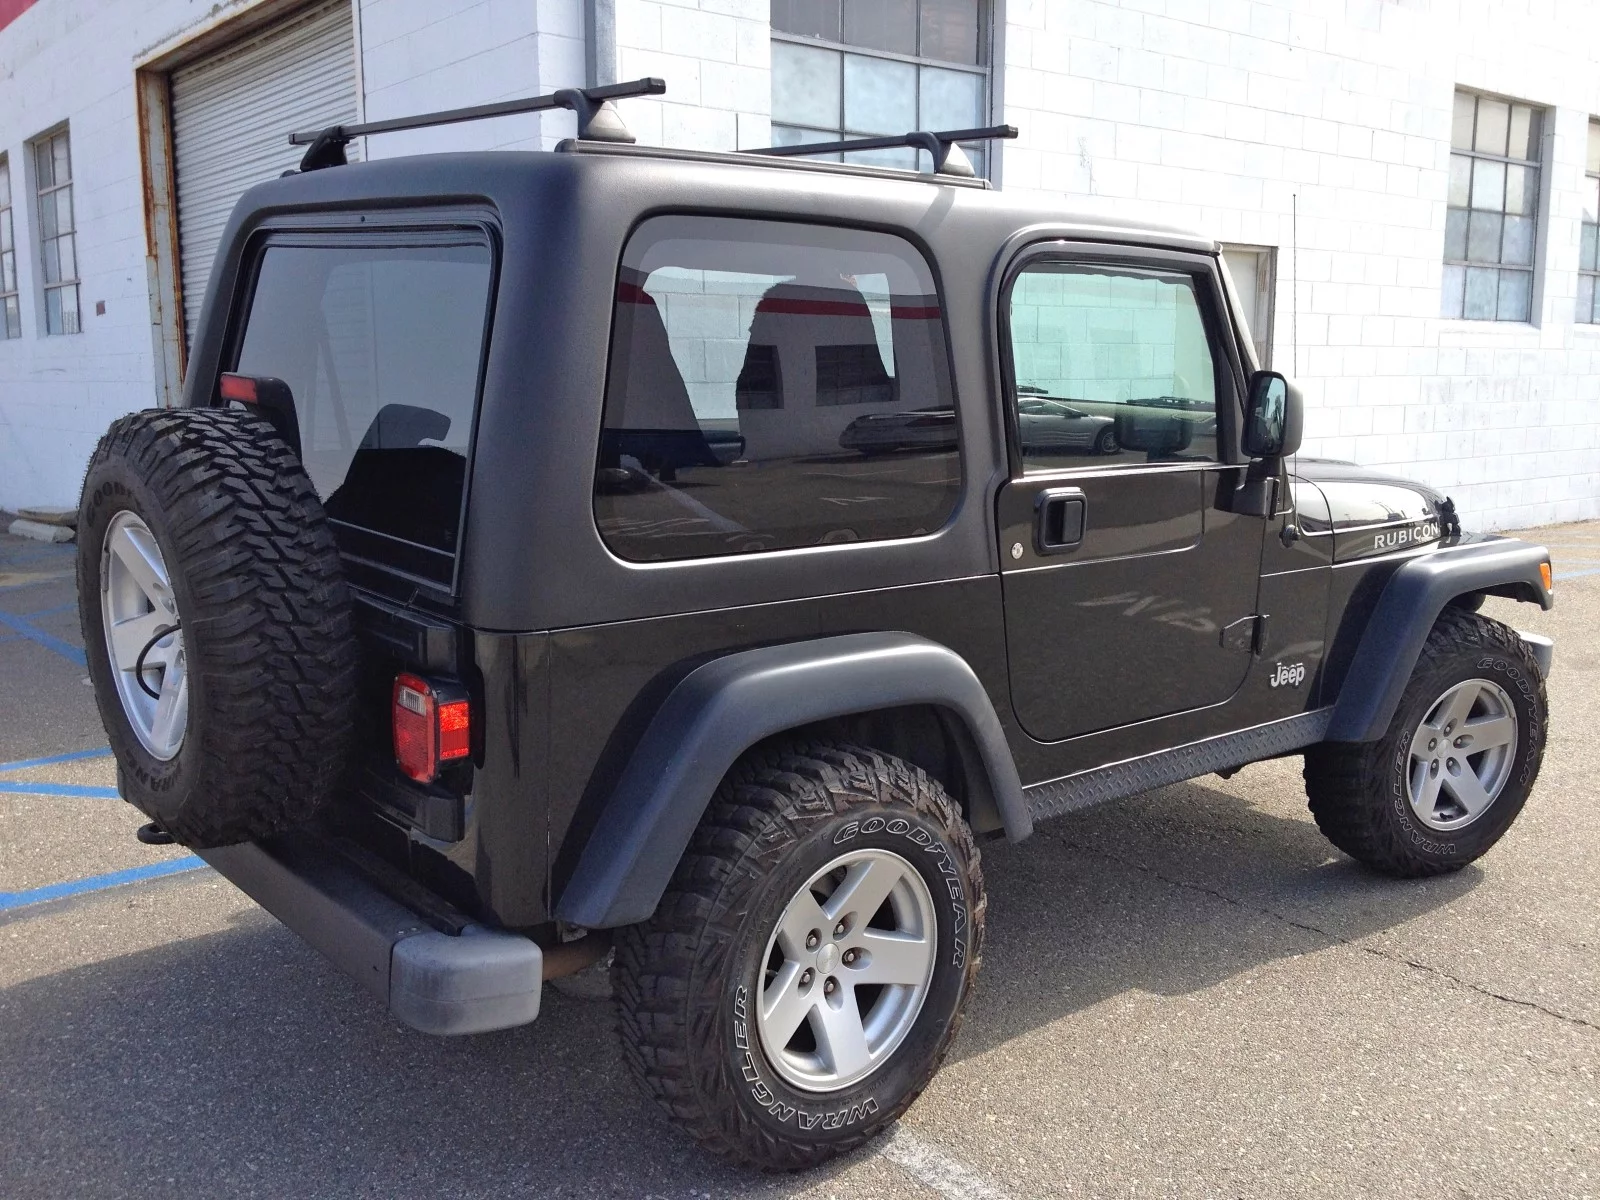 Jeep Wrangler TJ Hardtop Fits Jeeps For Years 1997-2006